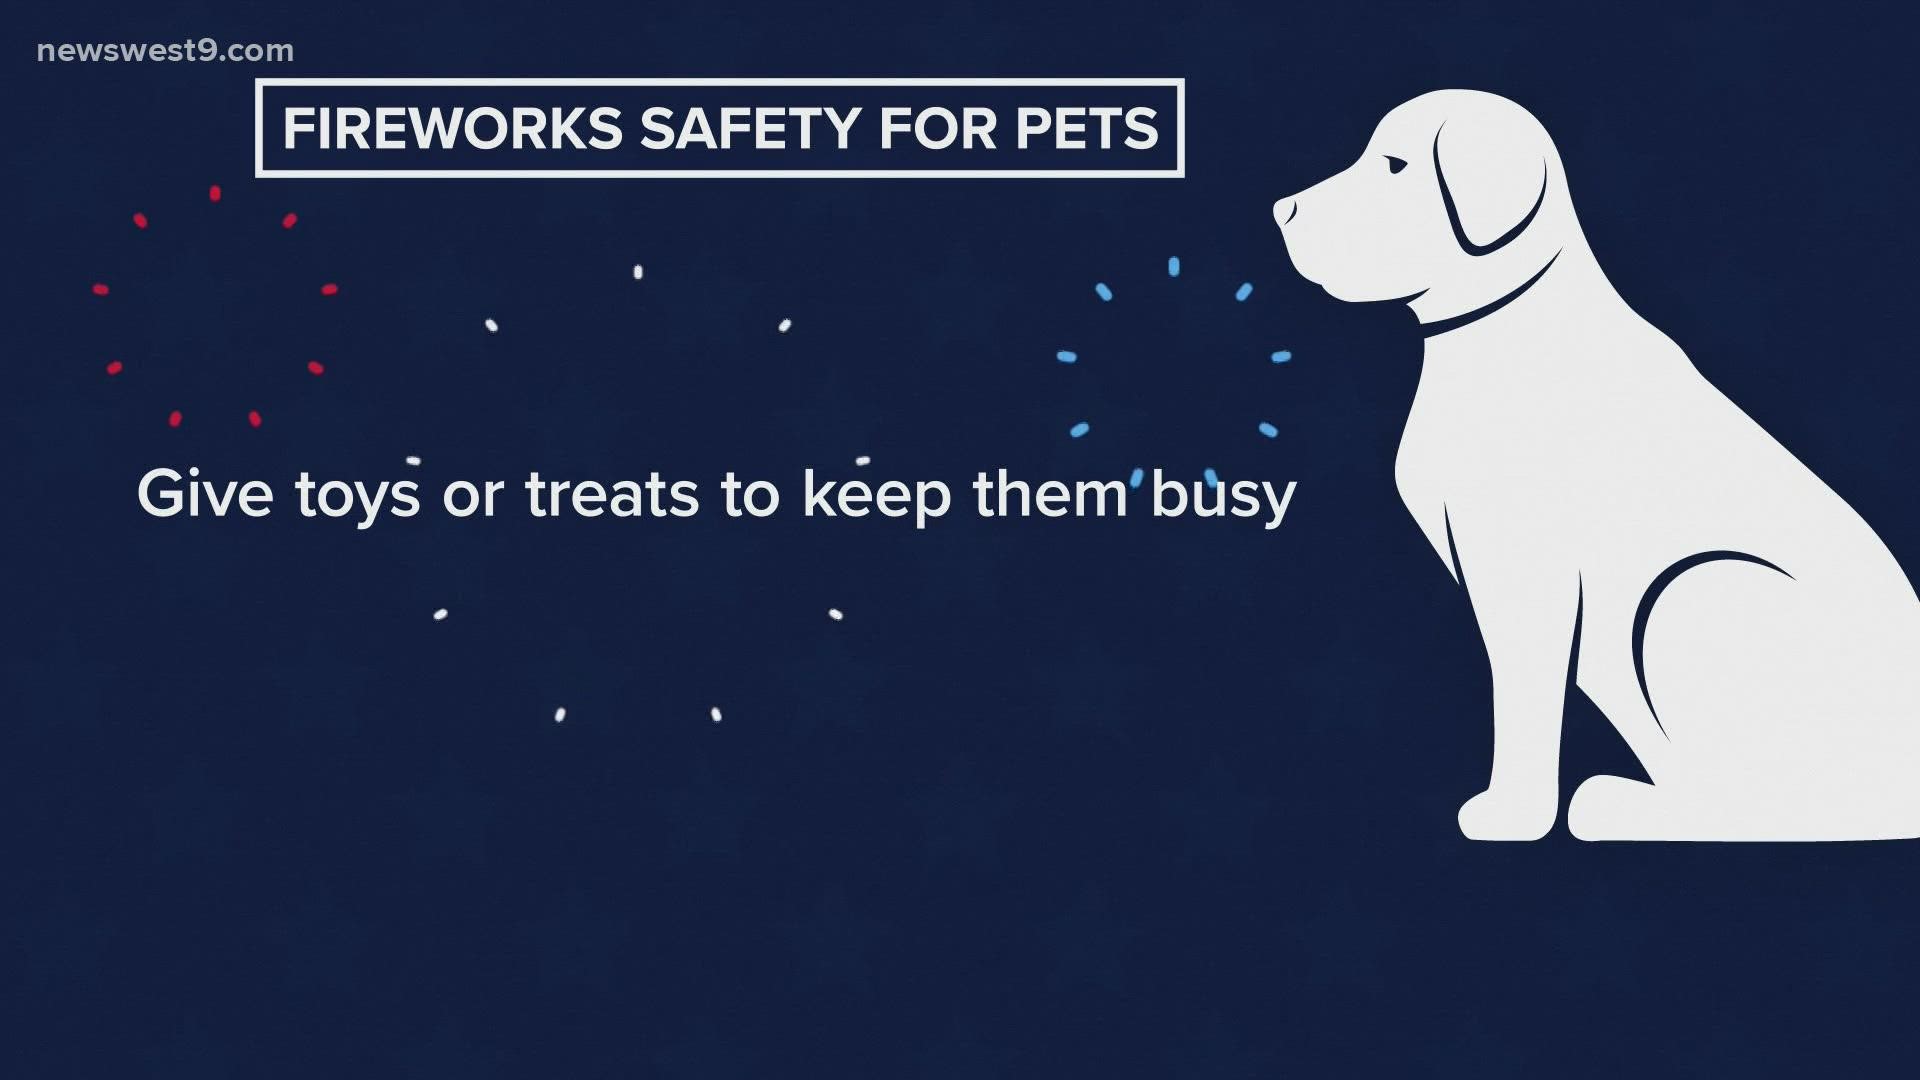 Some pets become scared when they hear fireworks going off on days like New Year's Eve and July 4.